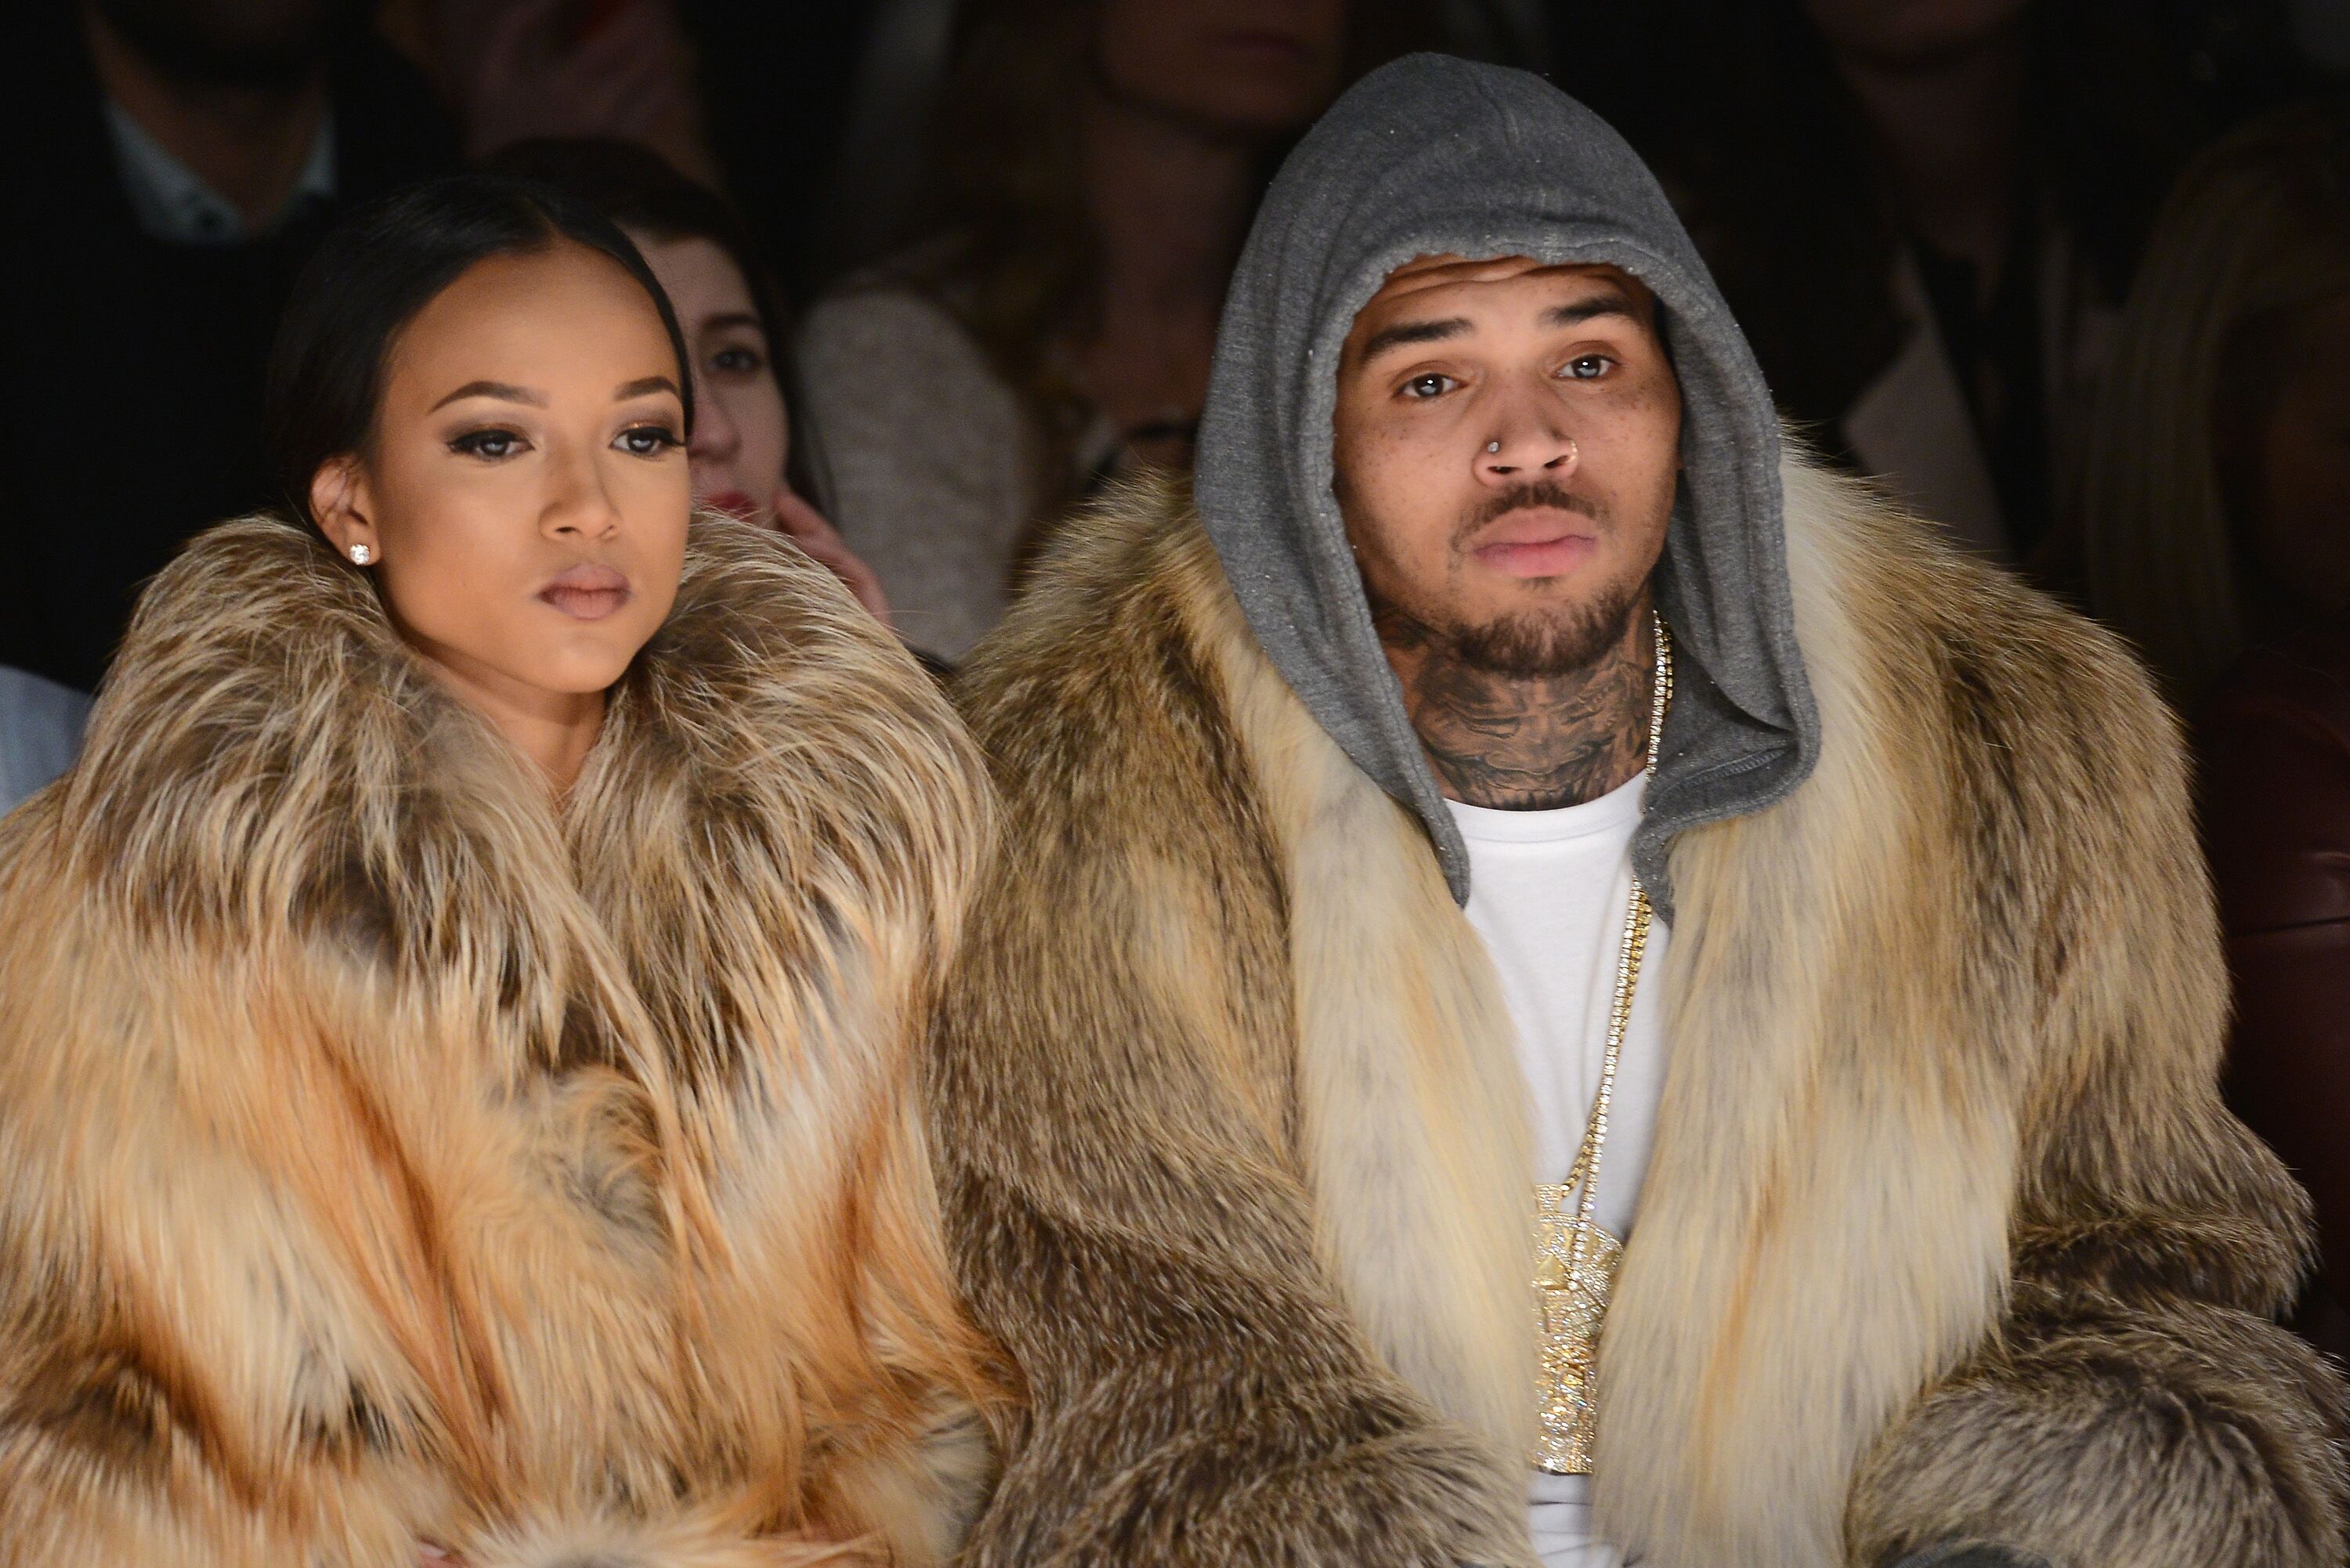 Chris Brown's Baby Mama Ammika Harris Shares Details about Her